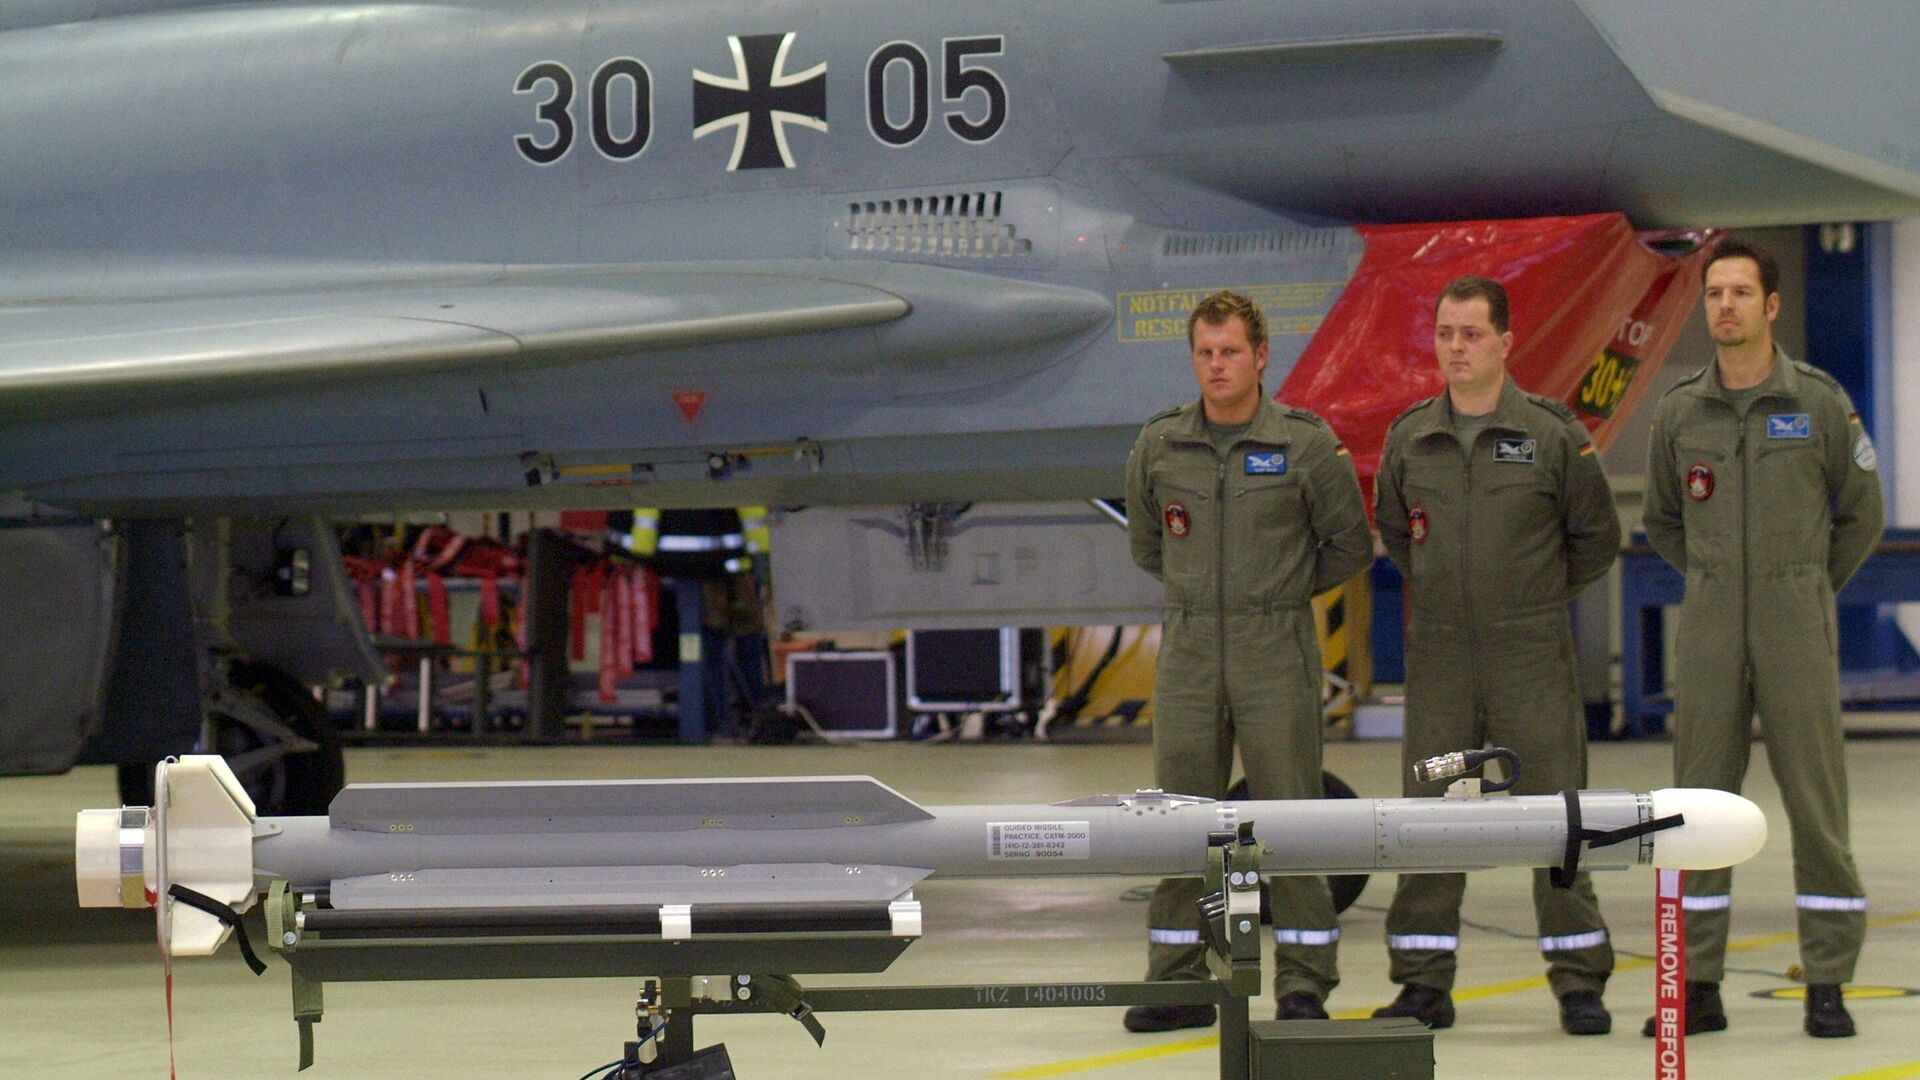 An IRIS-T Missile stands in front of an Eurofighter during an official ceremony at the airbase of Rostock-Laage, northern Germany, on Monday, Dec. 5, 2005. The German Luftwaffe put the Short Range Air-to-Air Missile IRIS-T official into service Monday, replacing old Sidewinder missiles. The air-to-air missiles can also be launched using ground-based platforms to serve as air defense systems. - Sputnik International, 1920, 18.11.2023